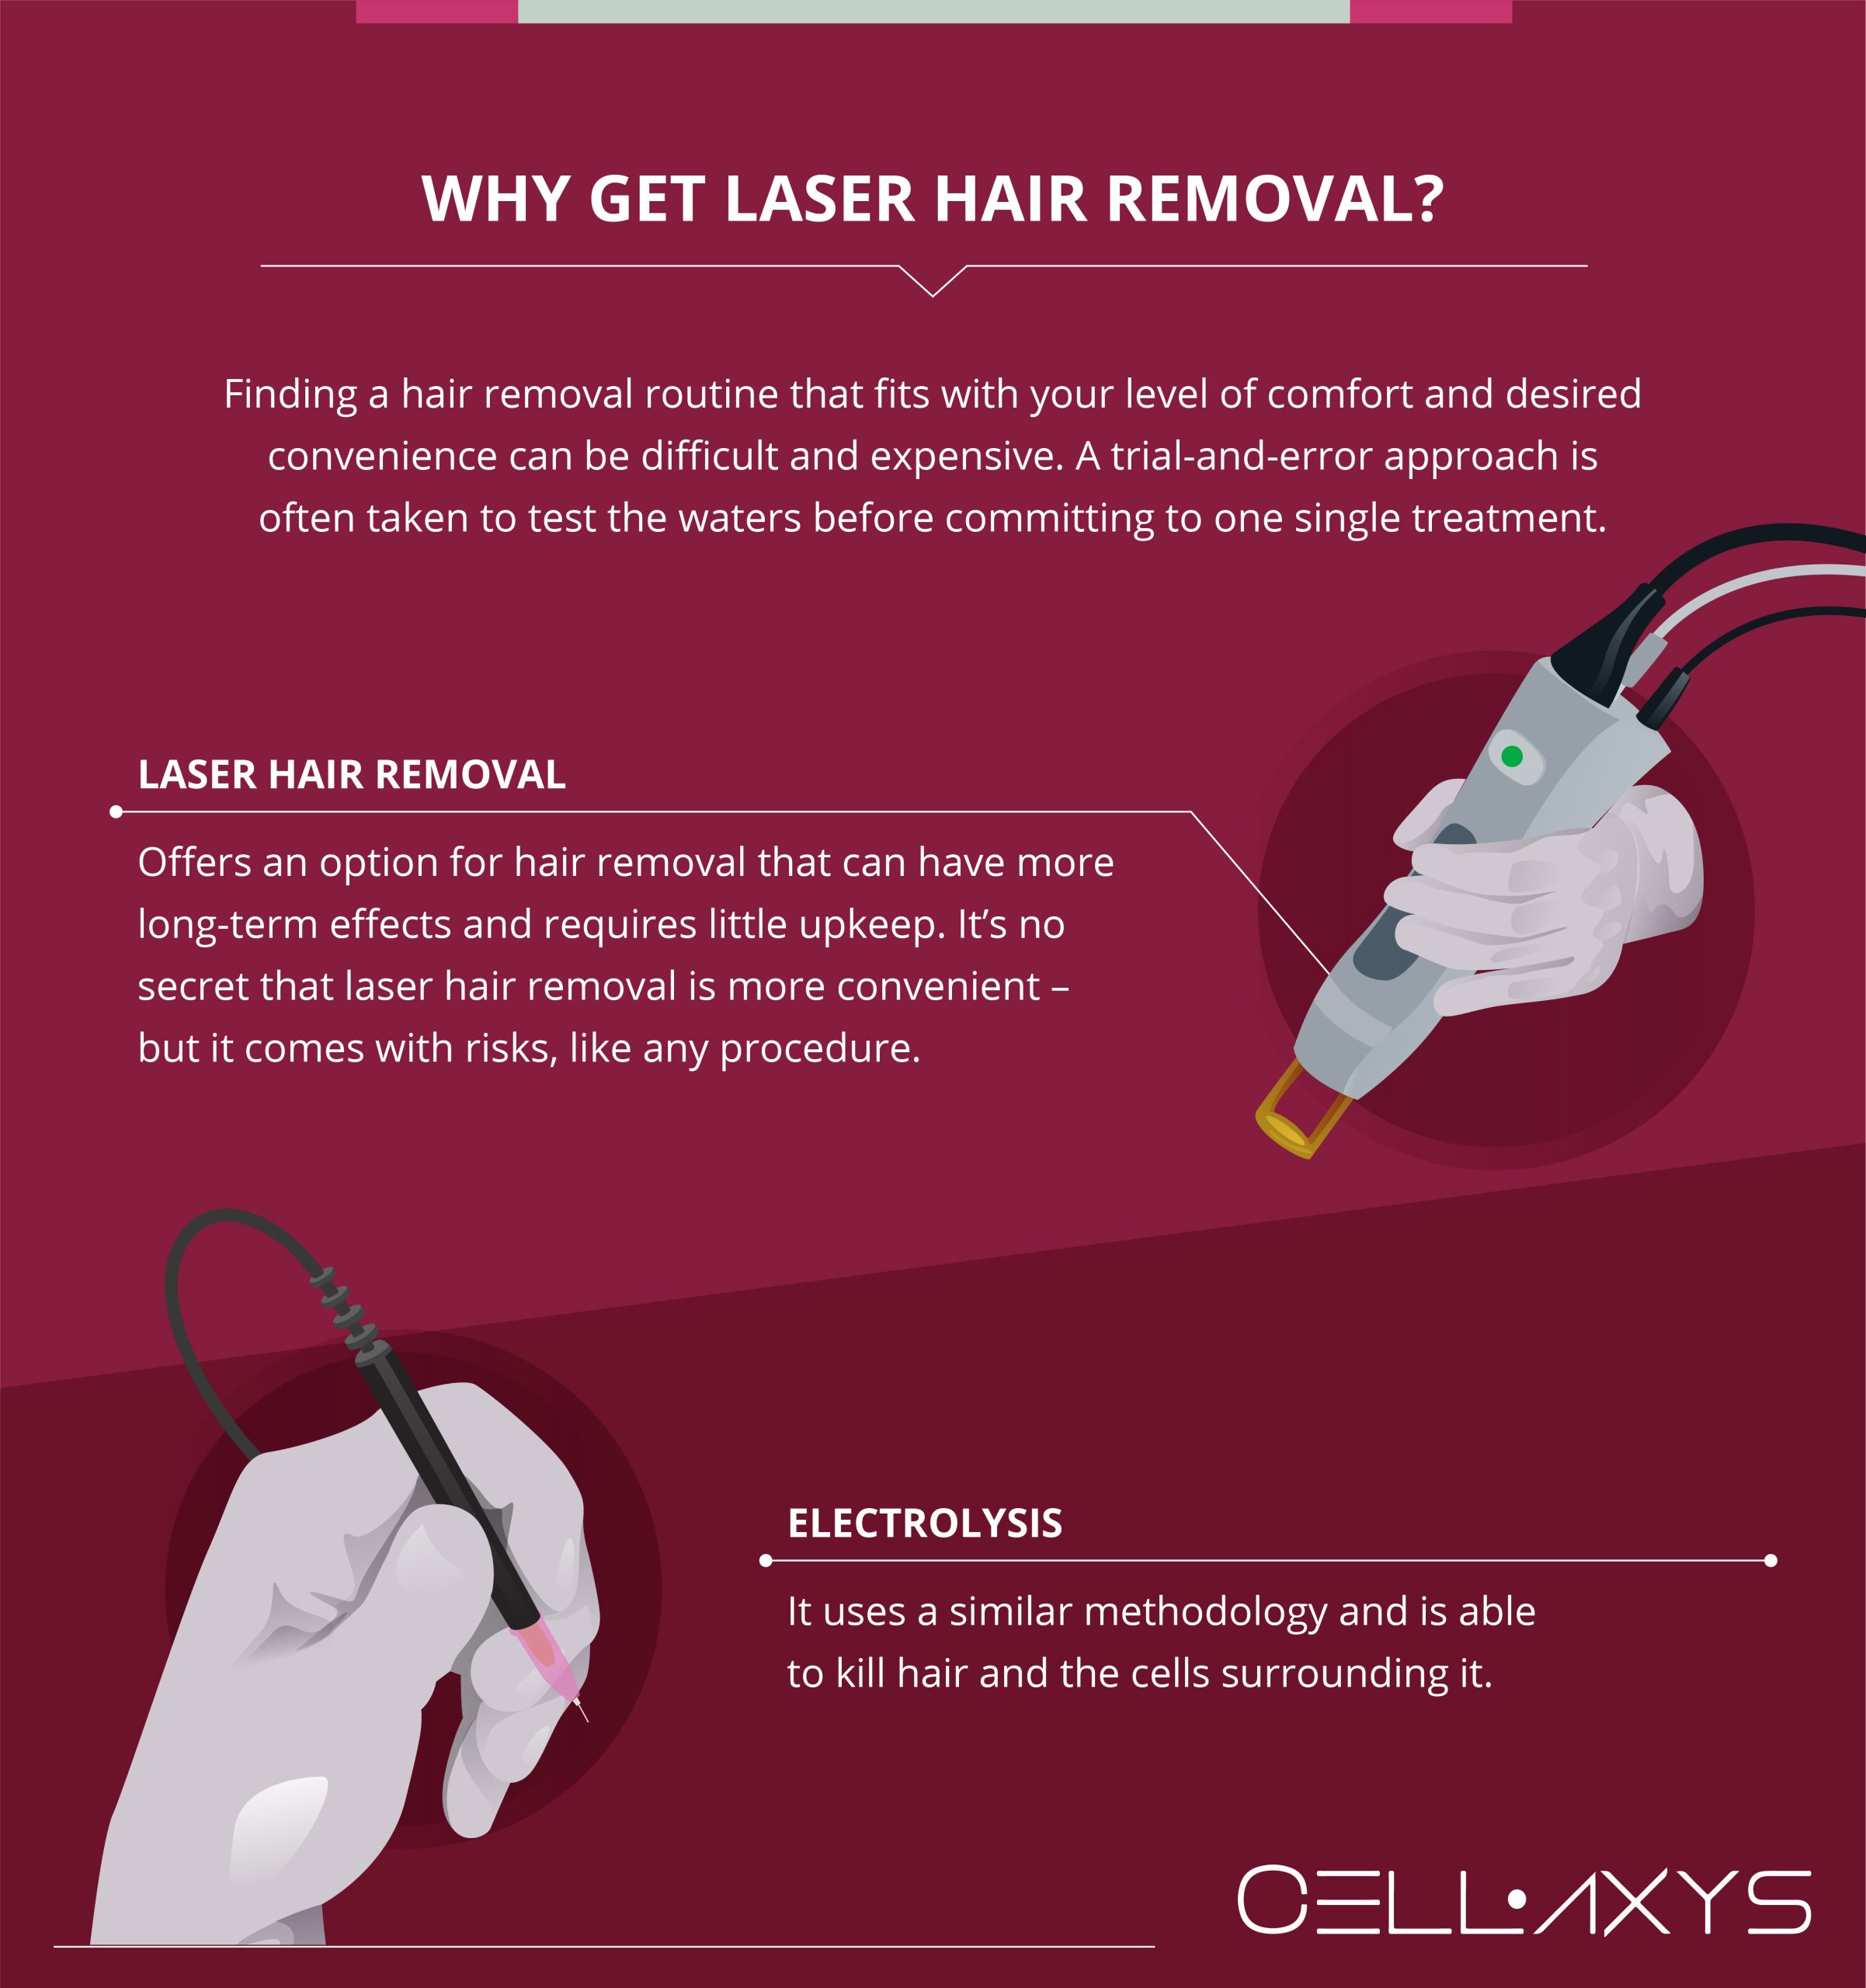 Why Get Laser Hair Removal